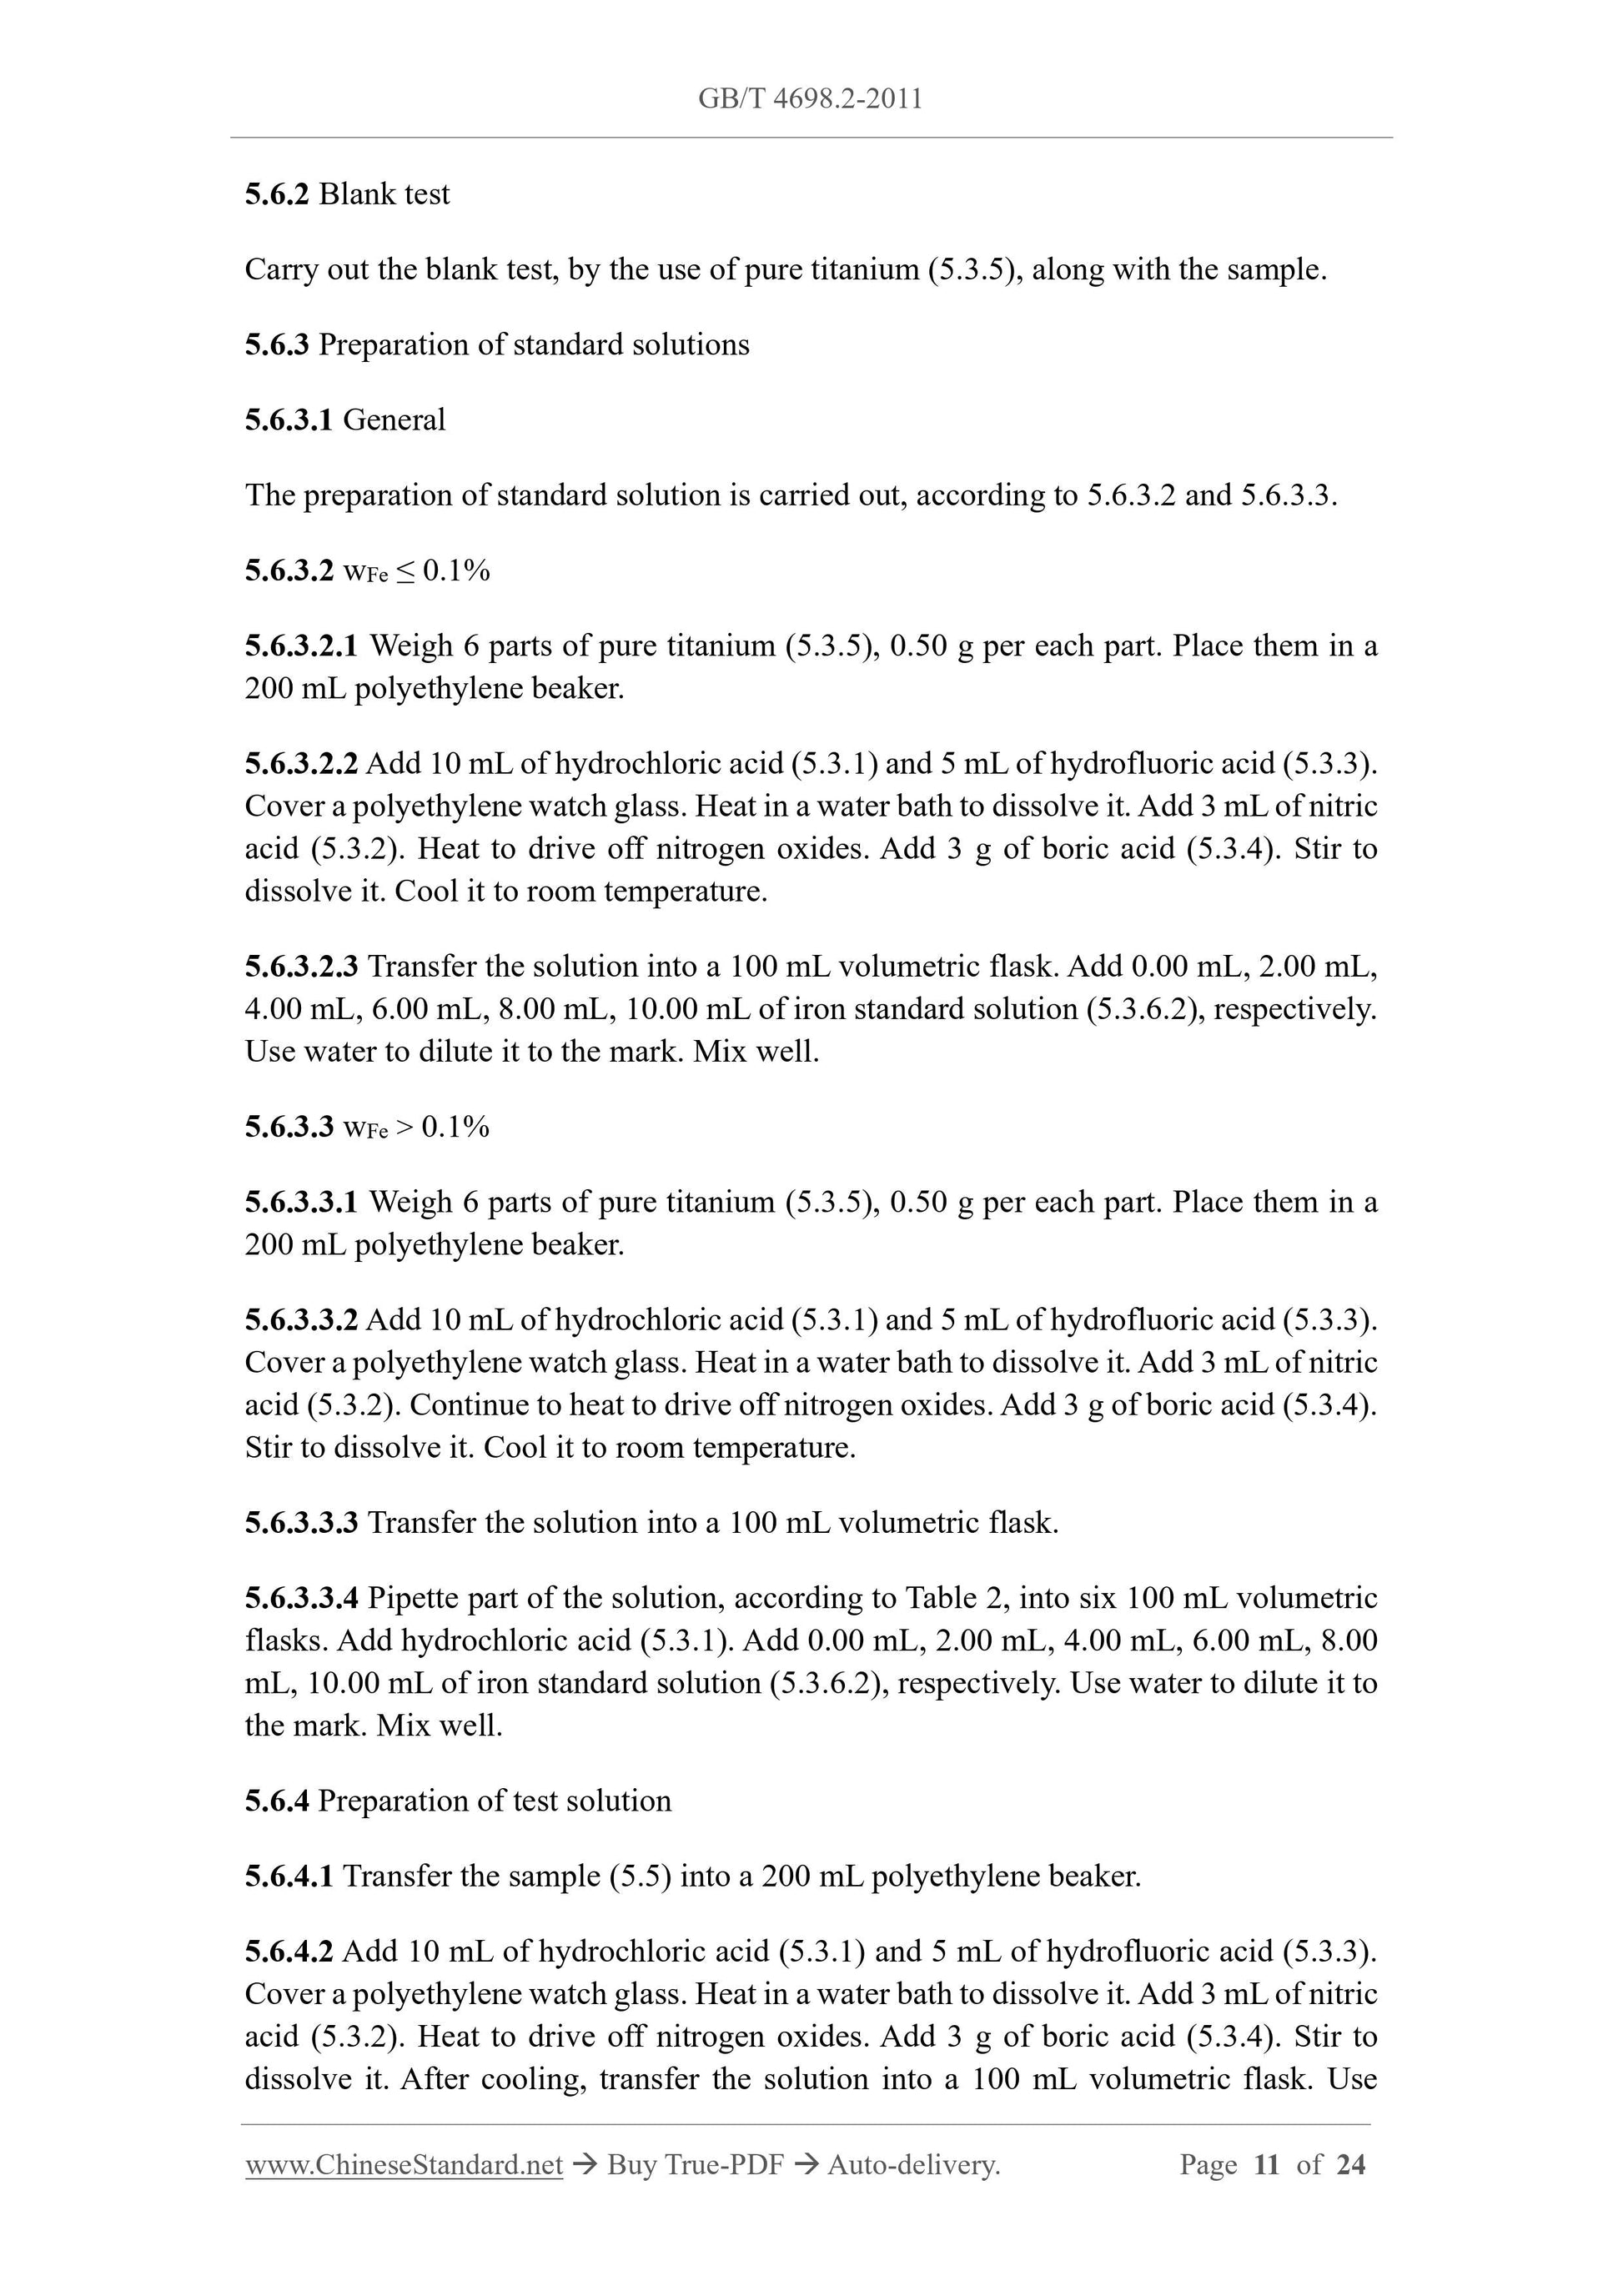 GB/T 4698.2-2011 Page 6